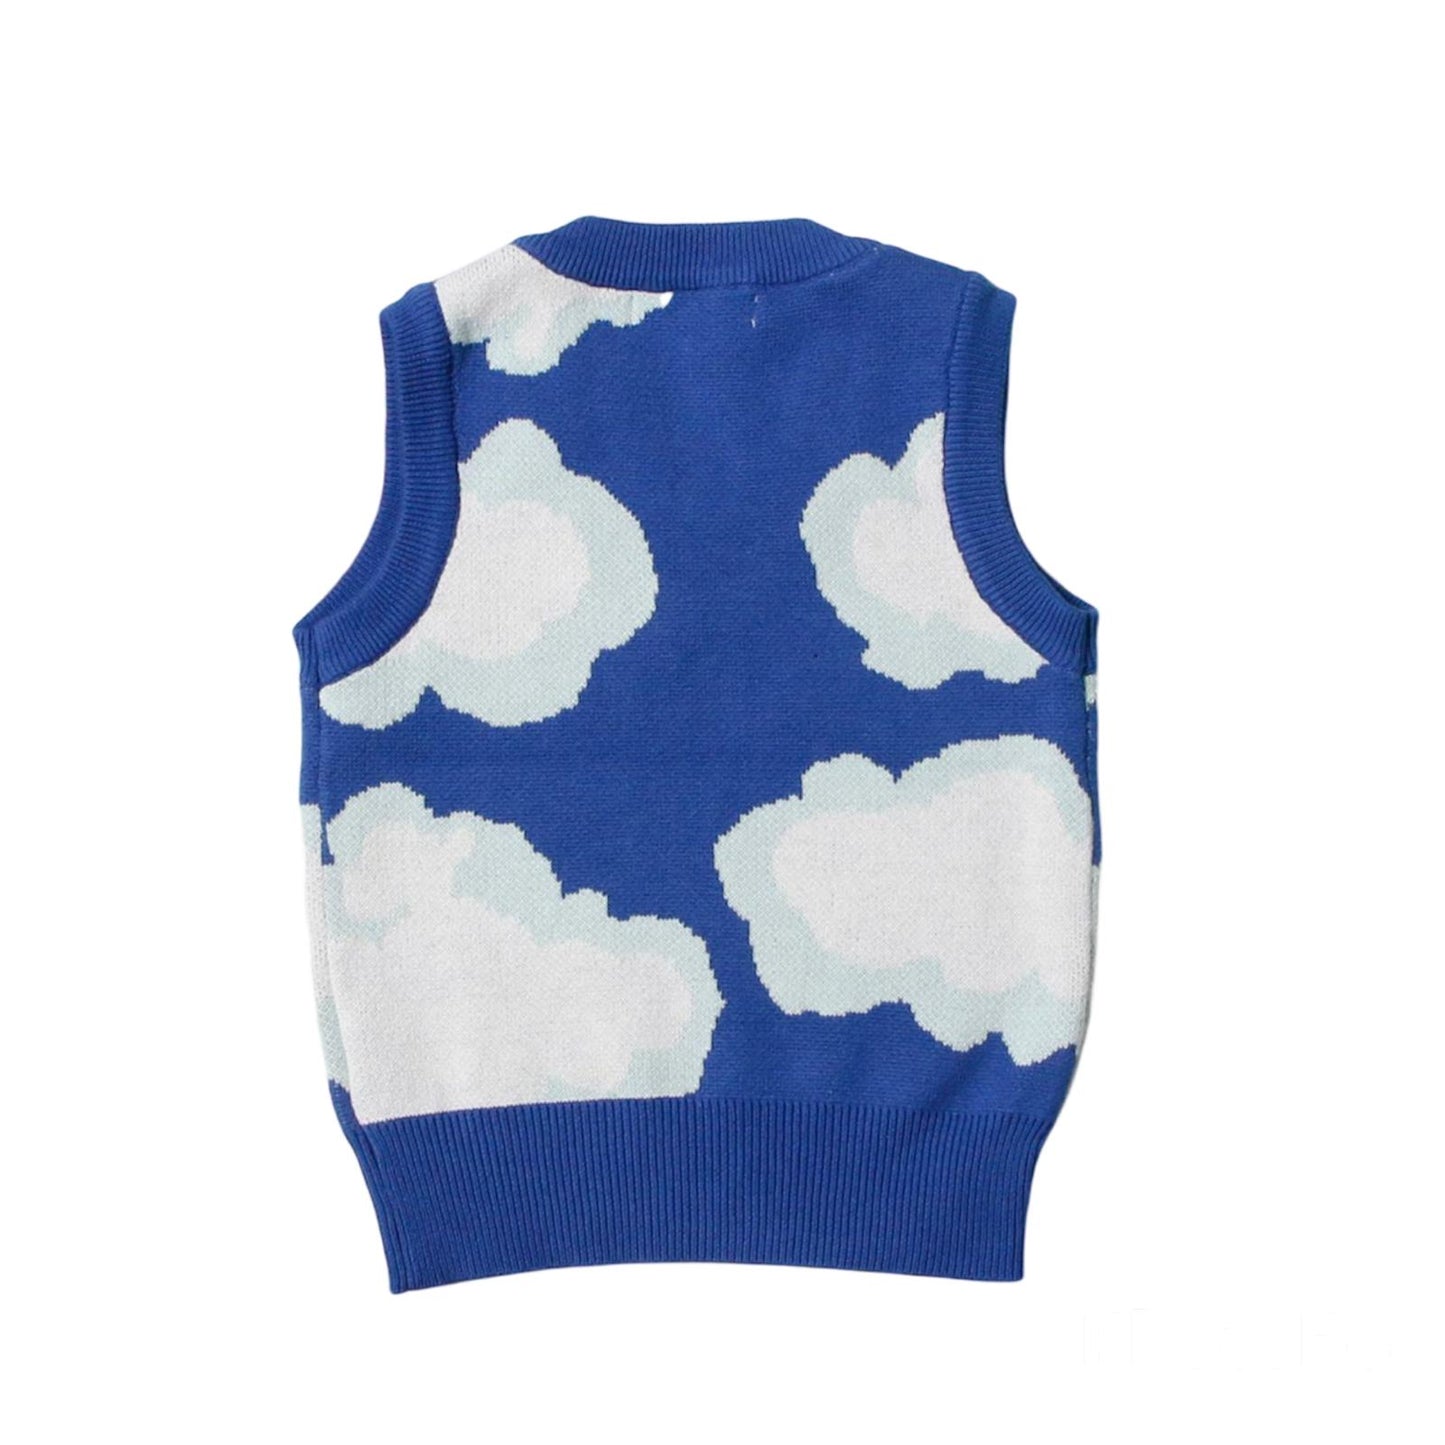 The clouds kids vest (Low in stock/ 5&6 yrs old)